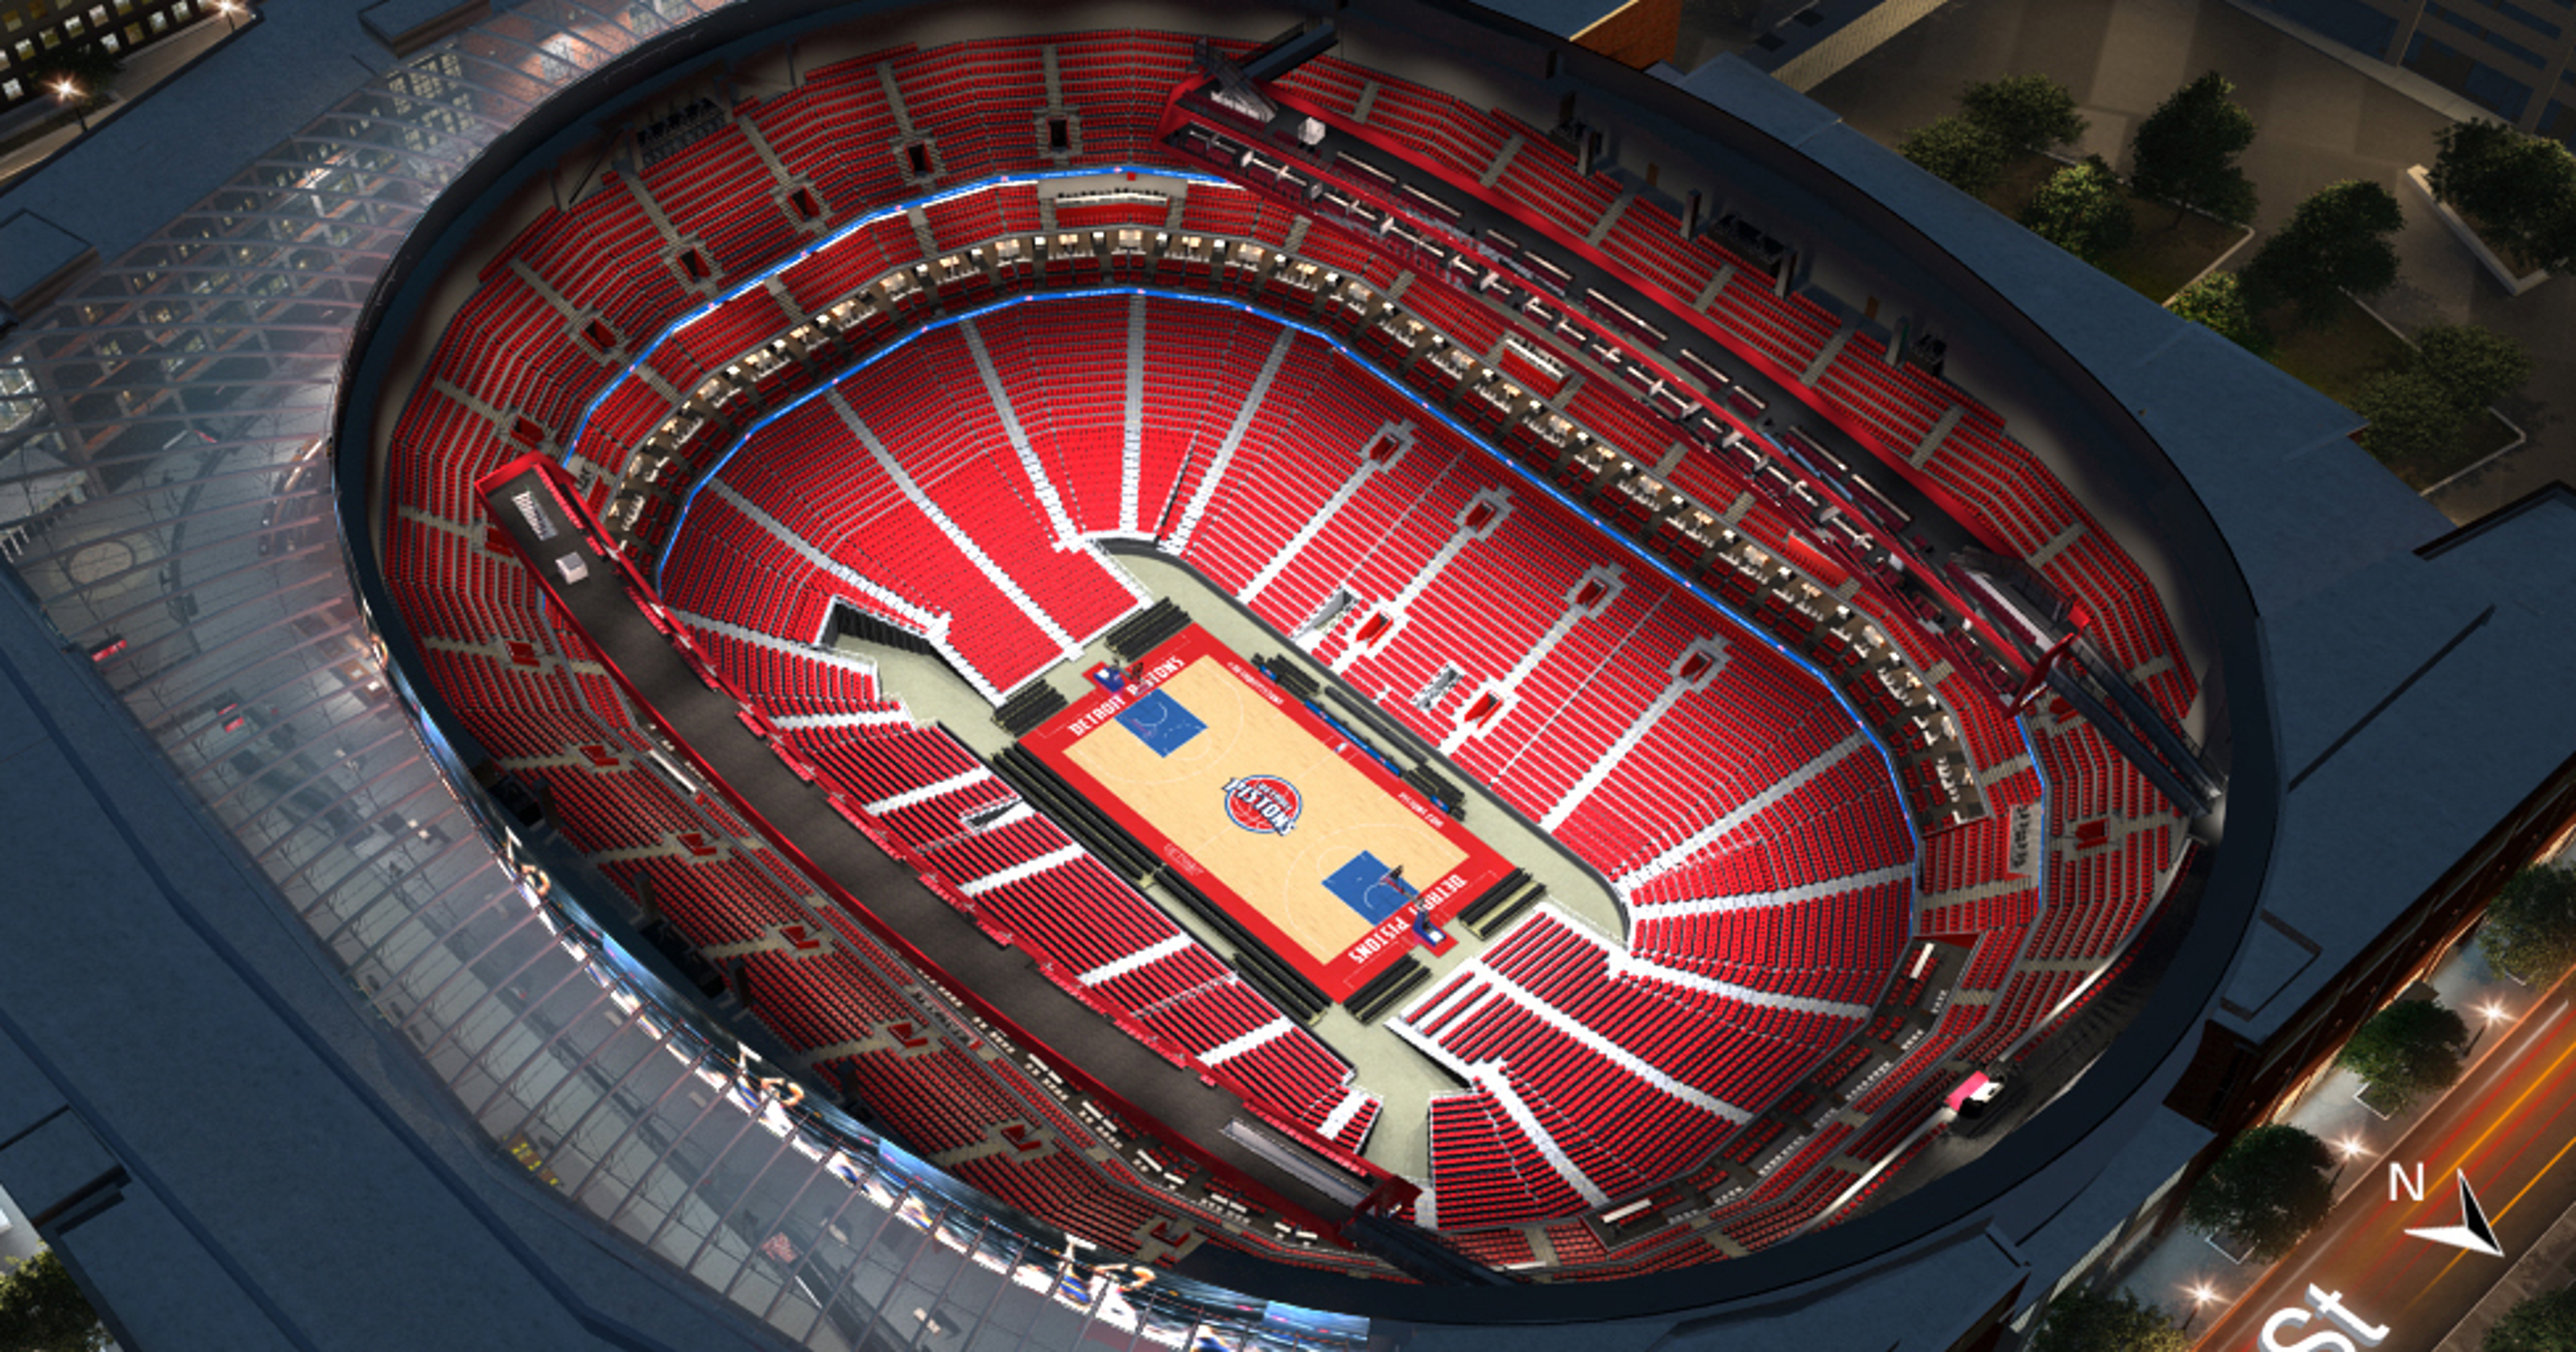 Take a look: Detroit Pistons' virtual tour of Little Caesars Arena